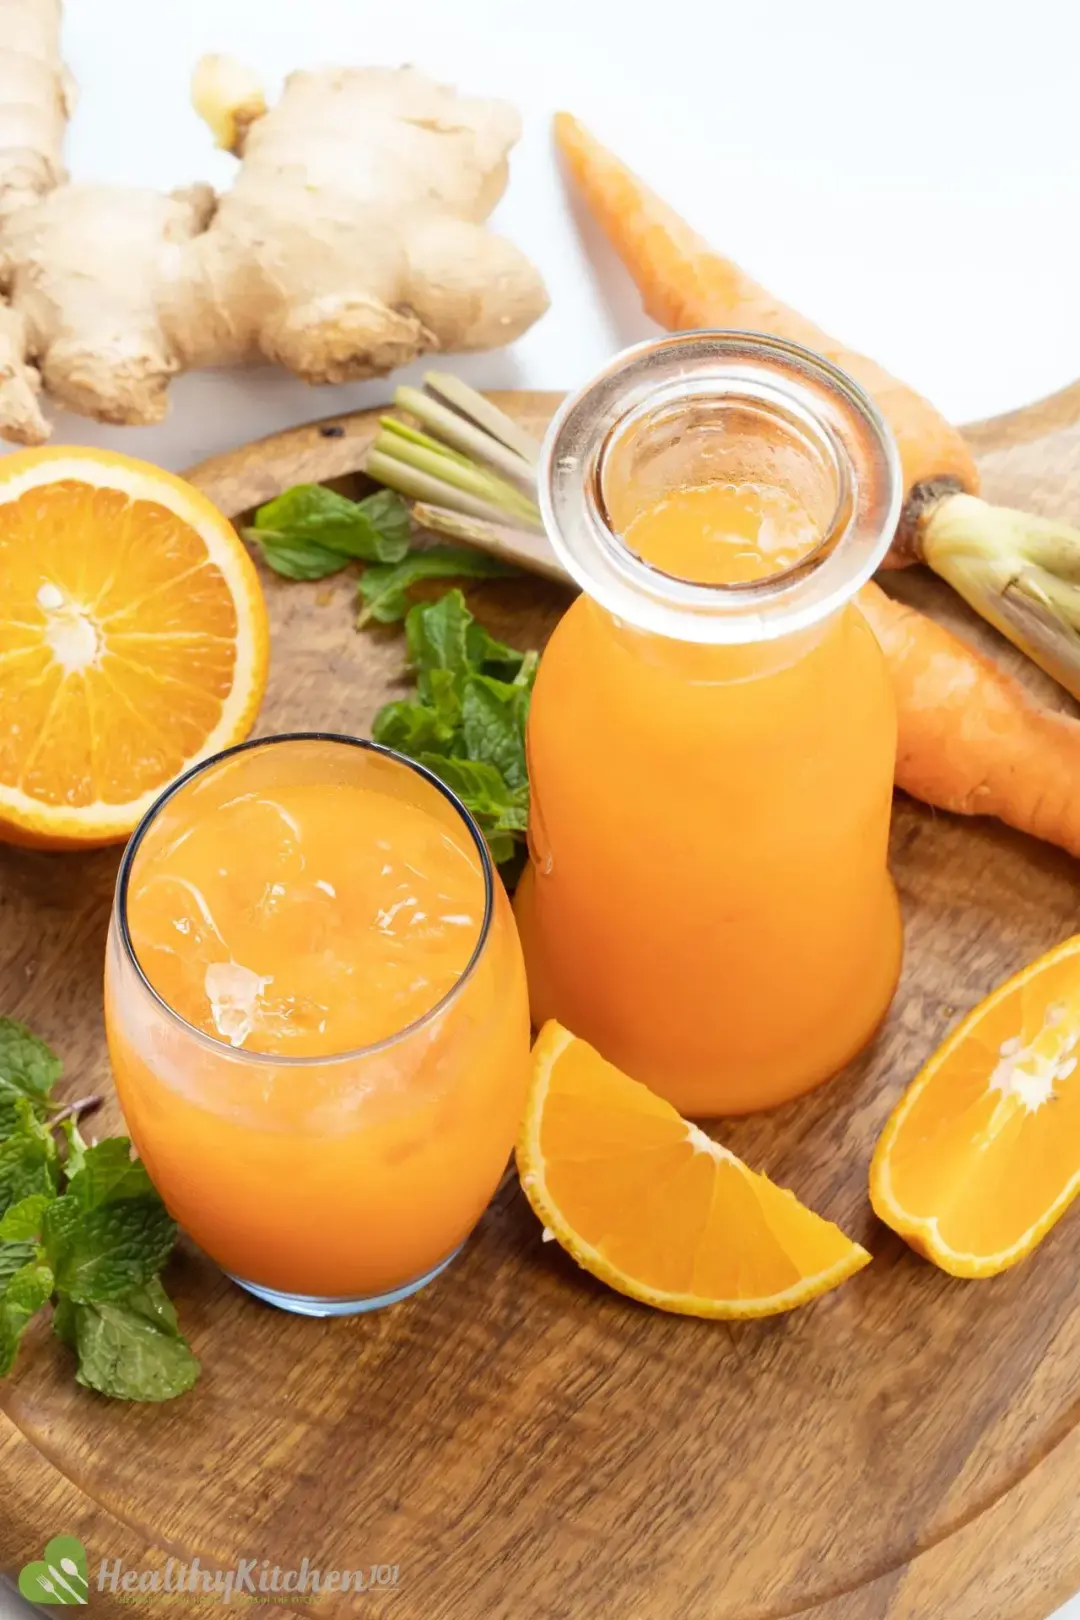 How to Make Carrot Orange and Ginger Juice